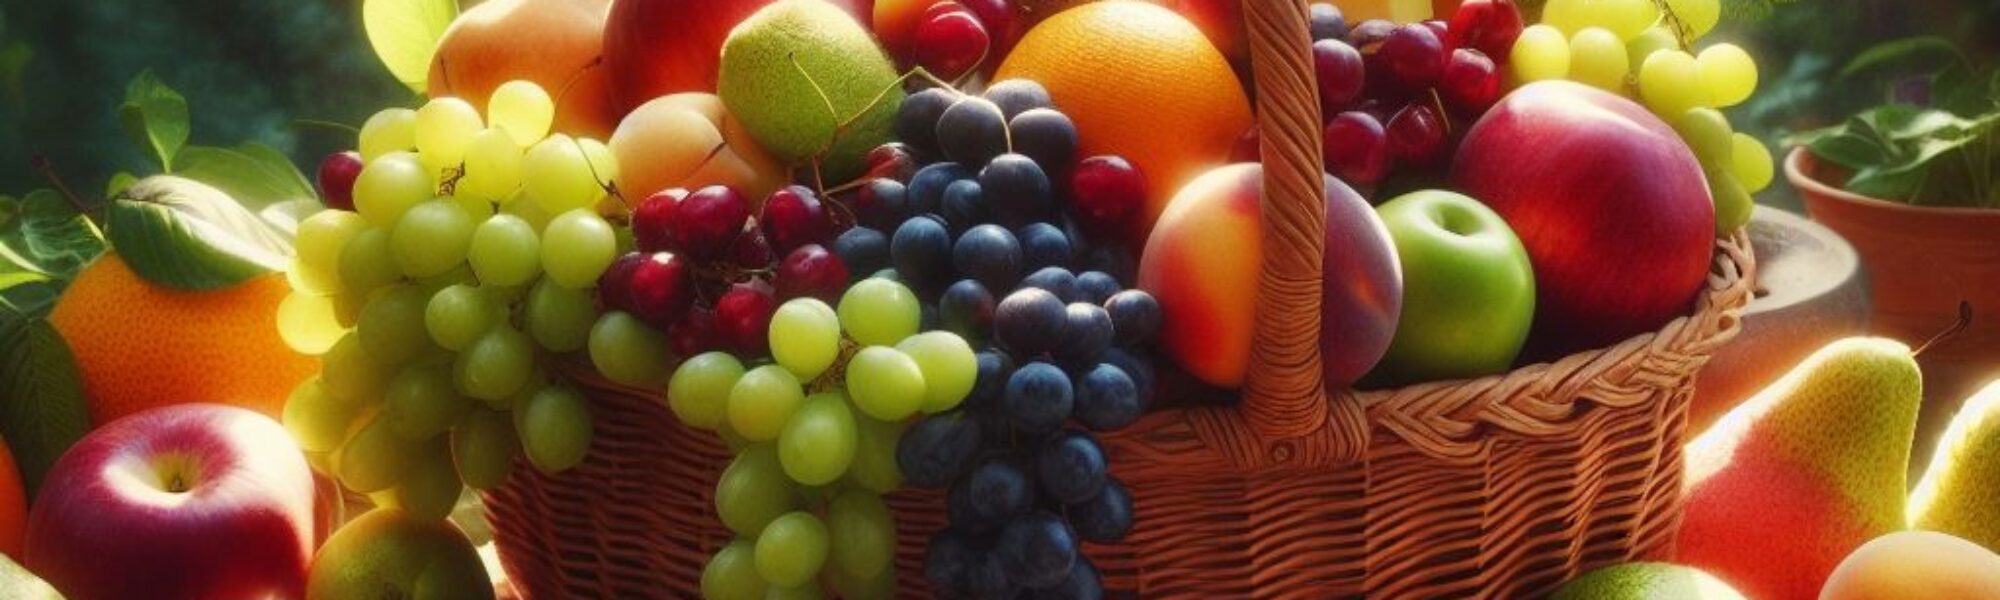 Fruit in a basket with sun rays